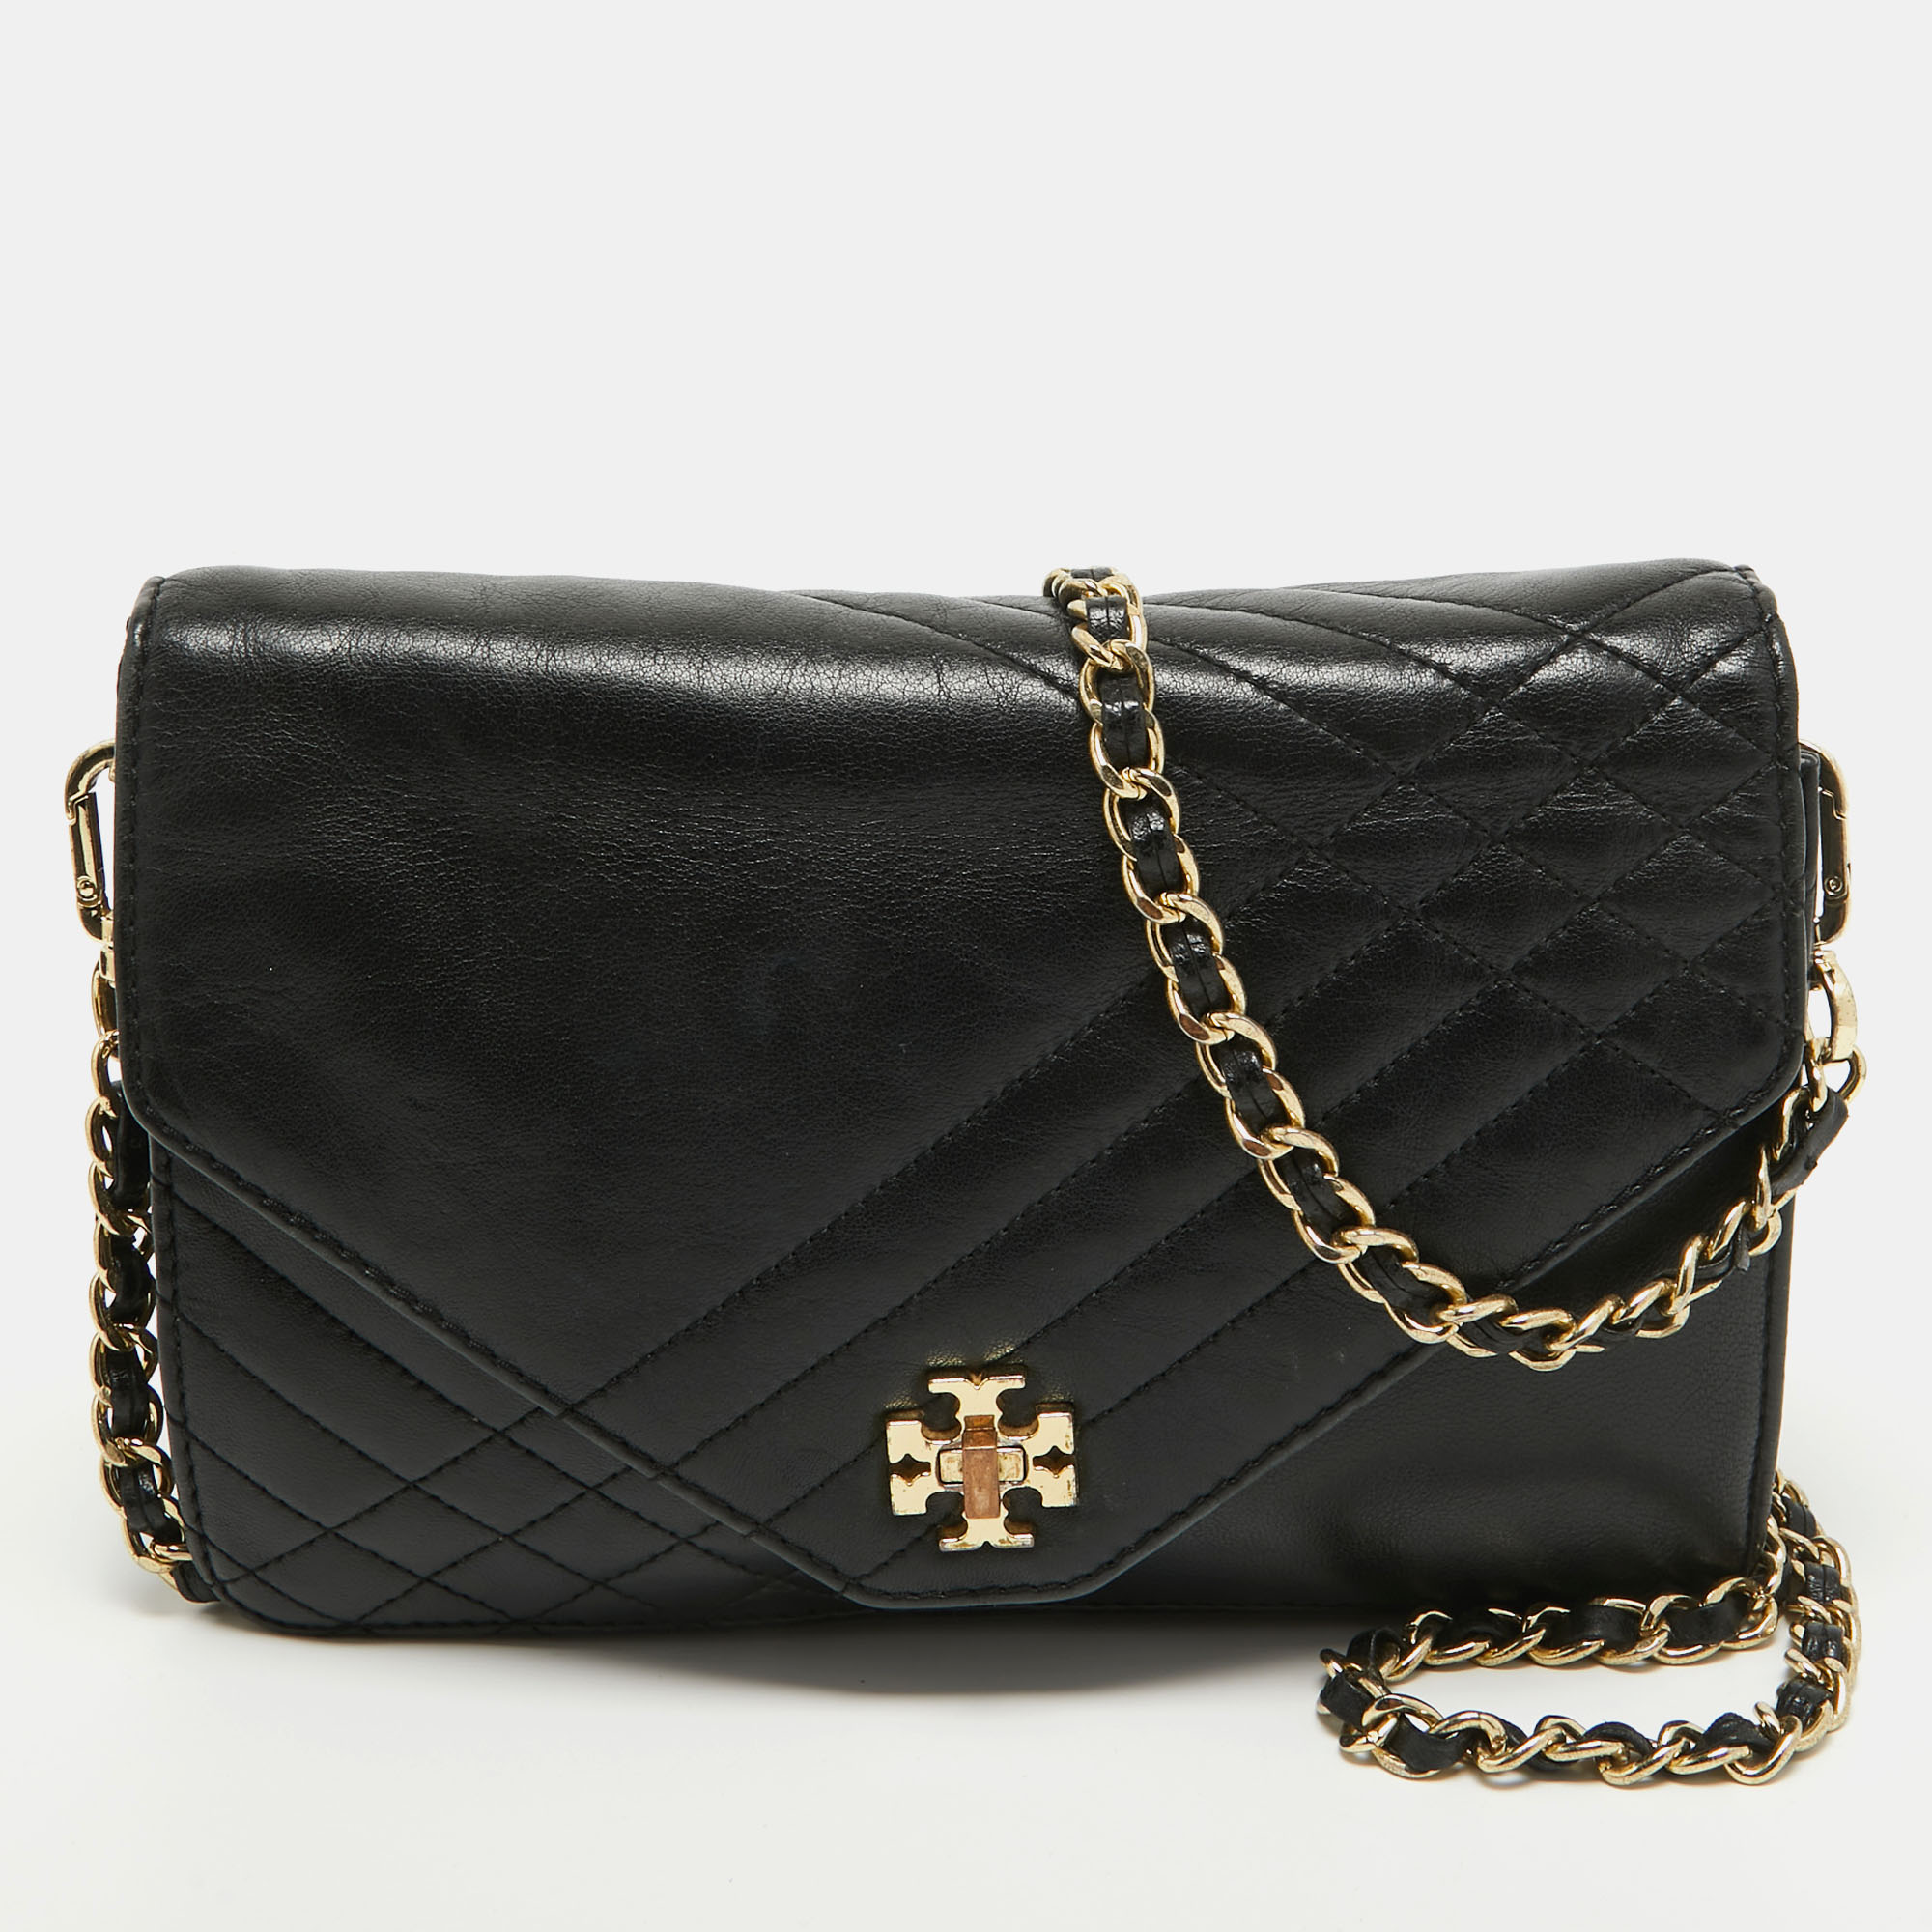 Pre-owned Tory Burch Black Leather Kira Envelope Flap Chain Bag